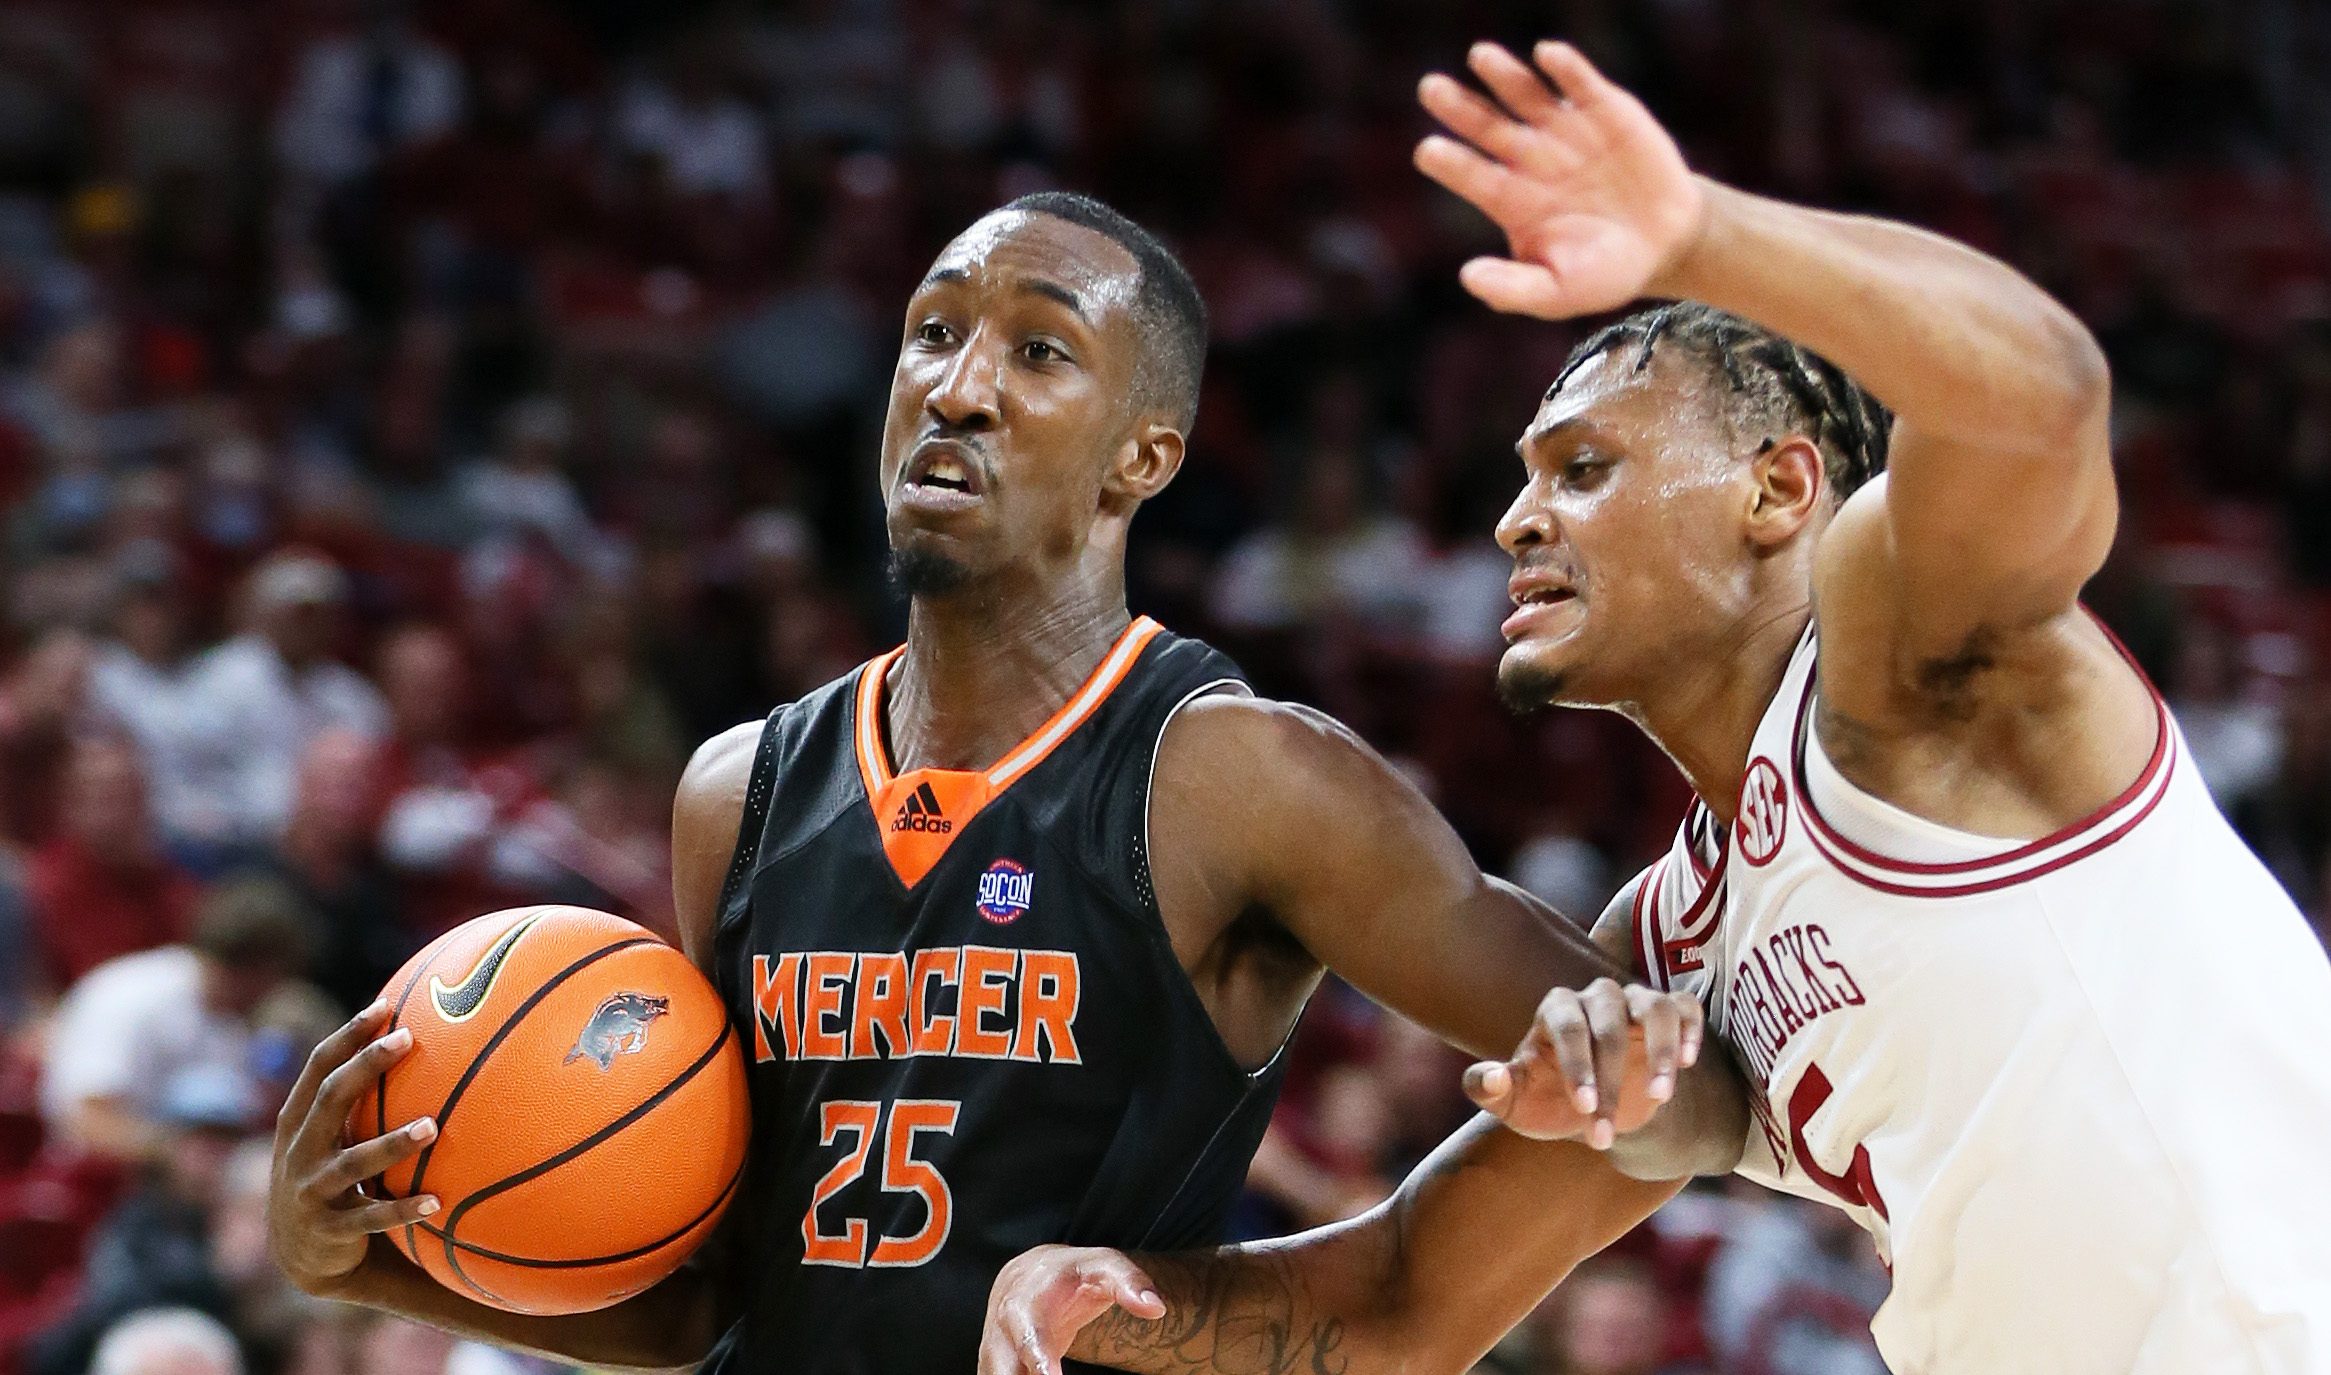 Mercer's Shawn Walker's missed dunk led to an amazing bad beat.